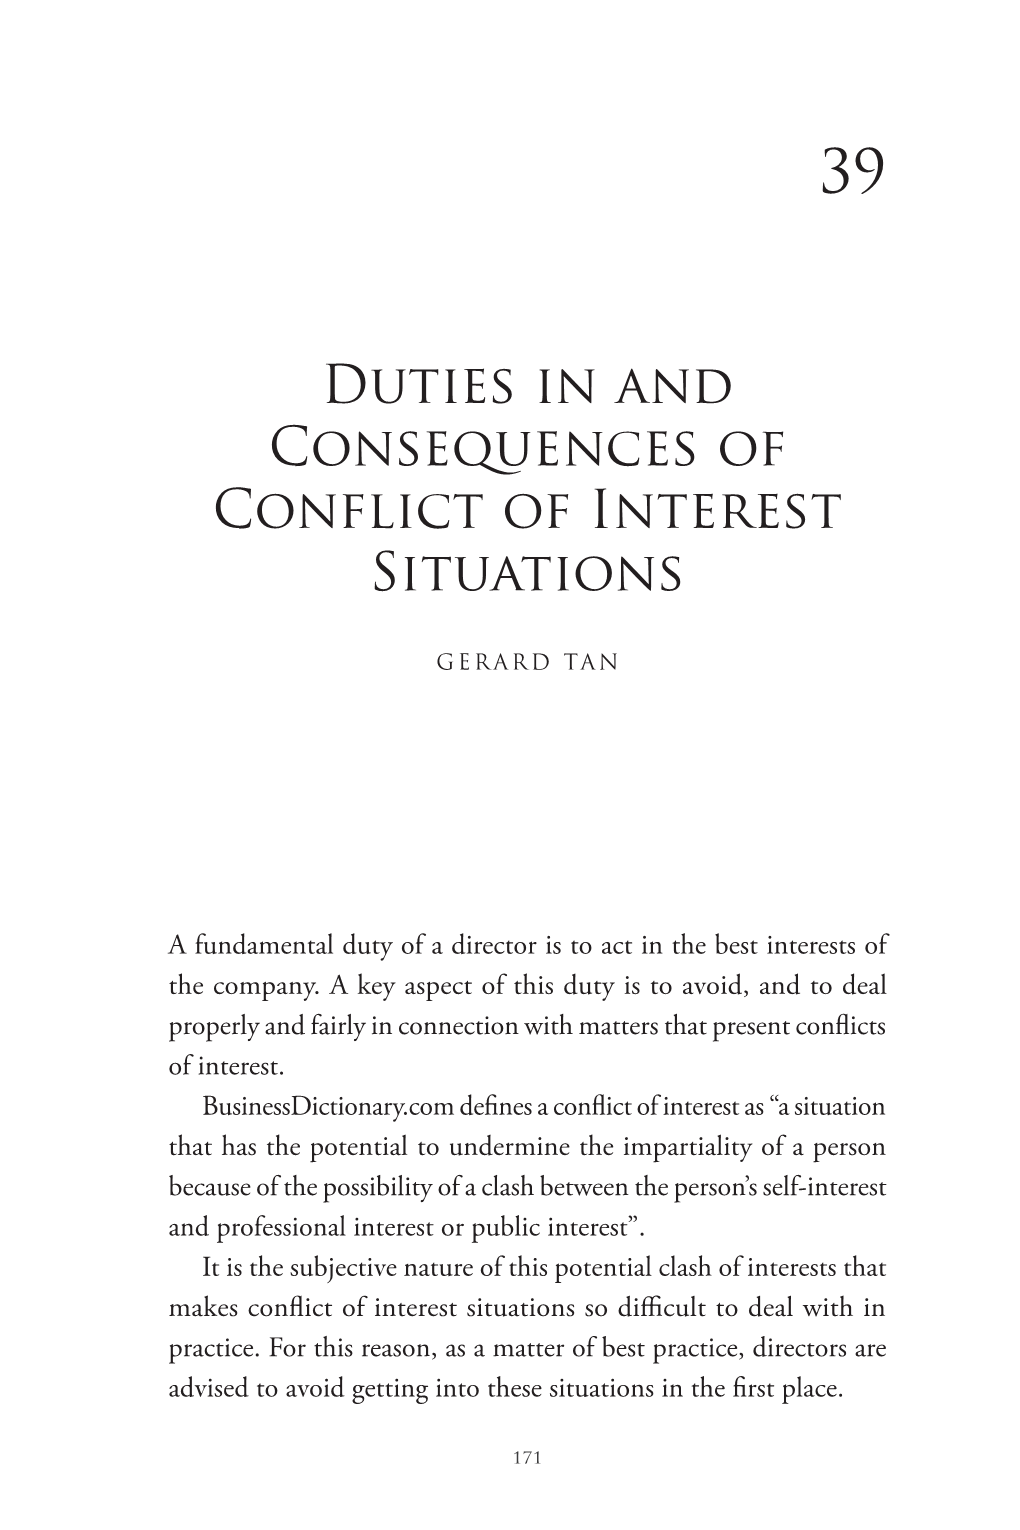 Duties in and Consequences of Conflict of Interest Situations